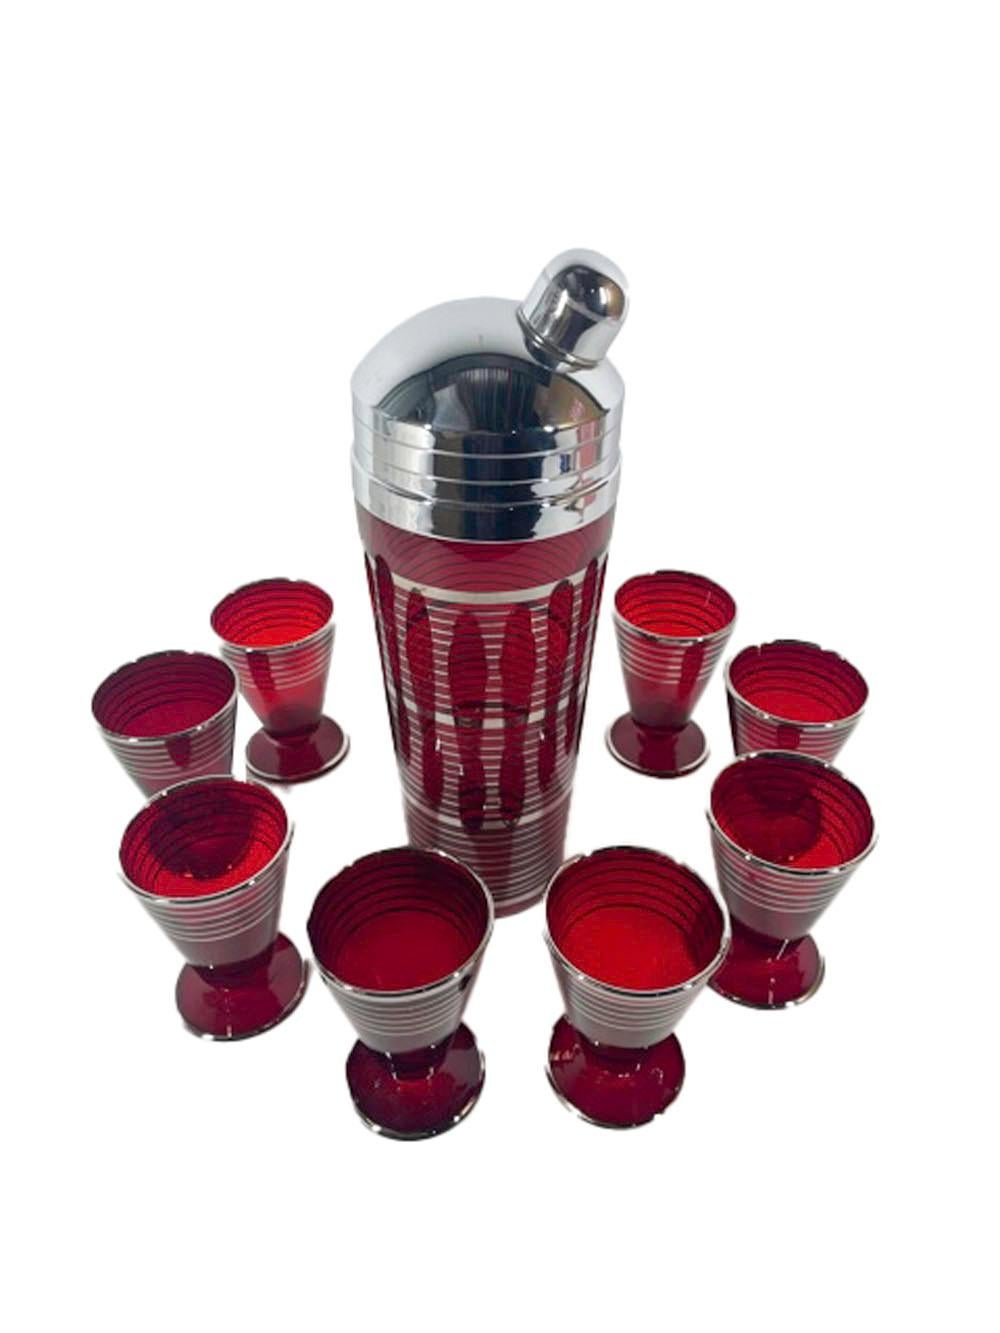 Art Deco Paden City Glass Ruby Red Cocktail Shaker Set with Silver Bands 1